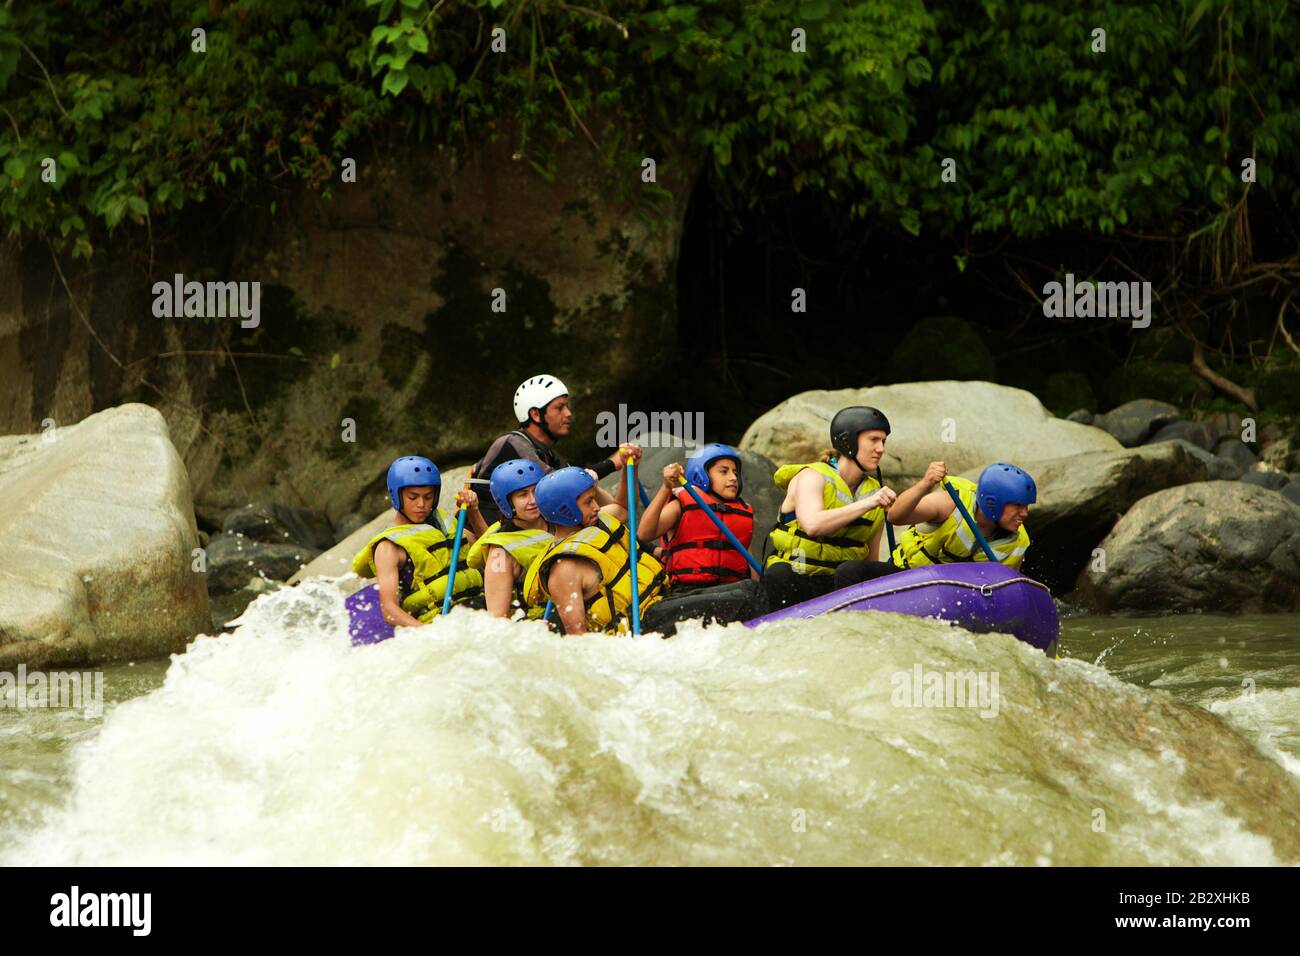 Community Of Mixed Visitor Men And Women With Guided By Specialist Pilot On Whitewater Creek Rafting In Ecuador Stock Photo